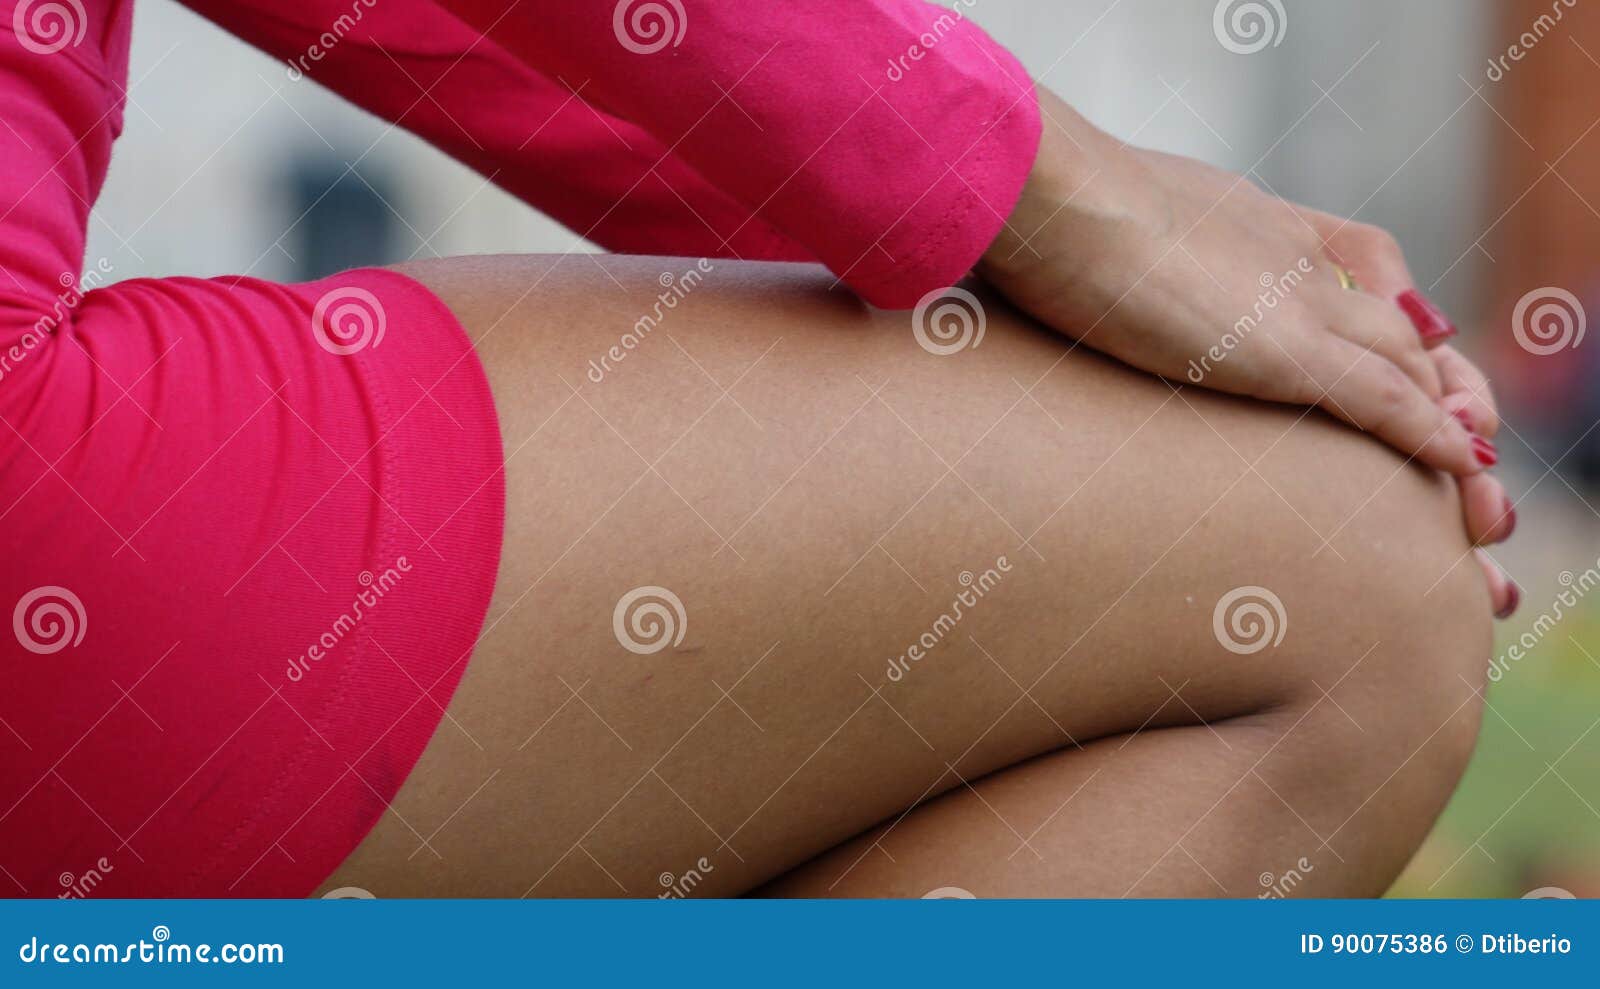 113 Teen Girl Legs Knees Stock Photos, Images & Pictures